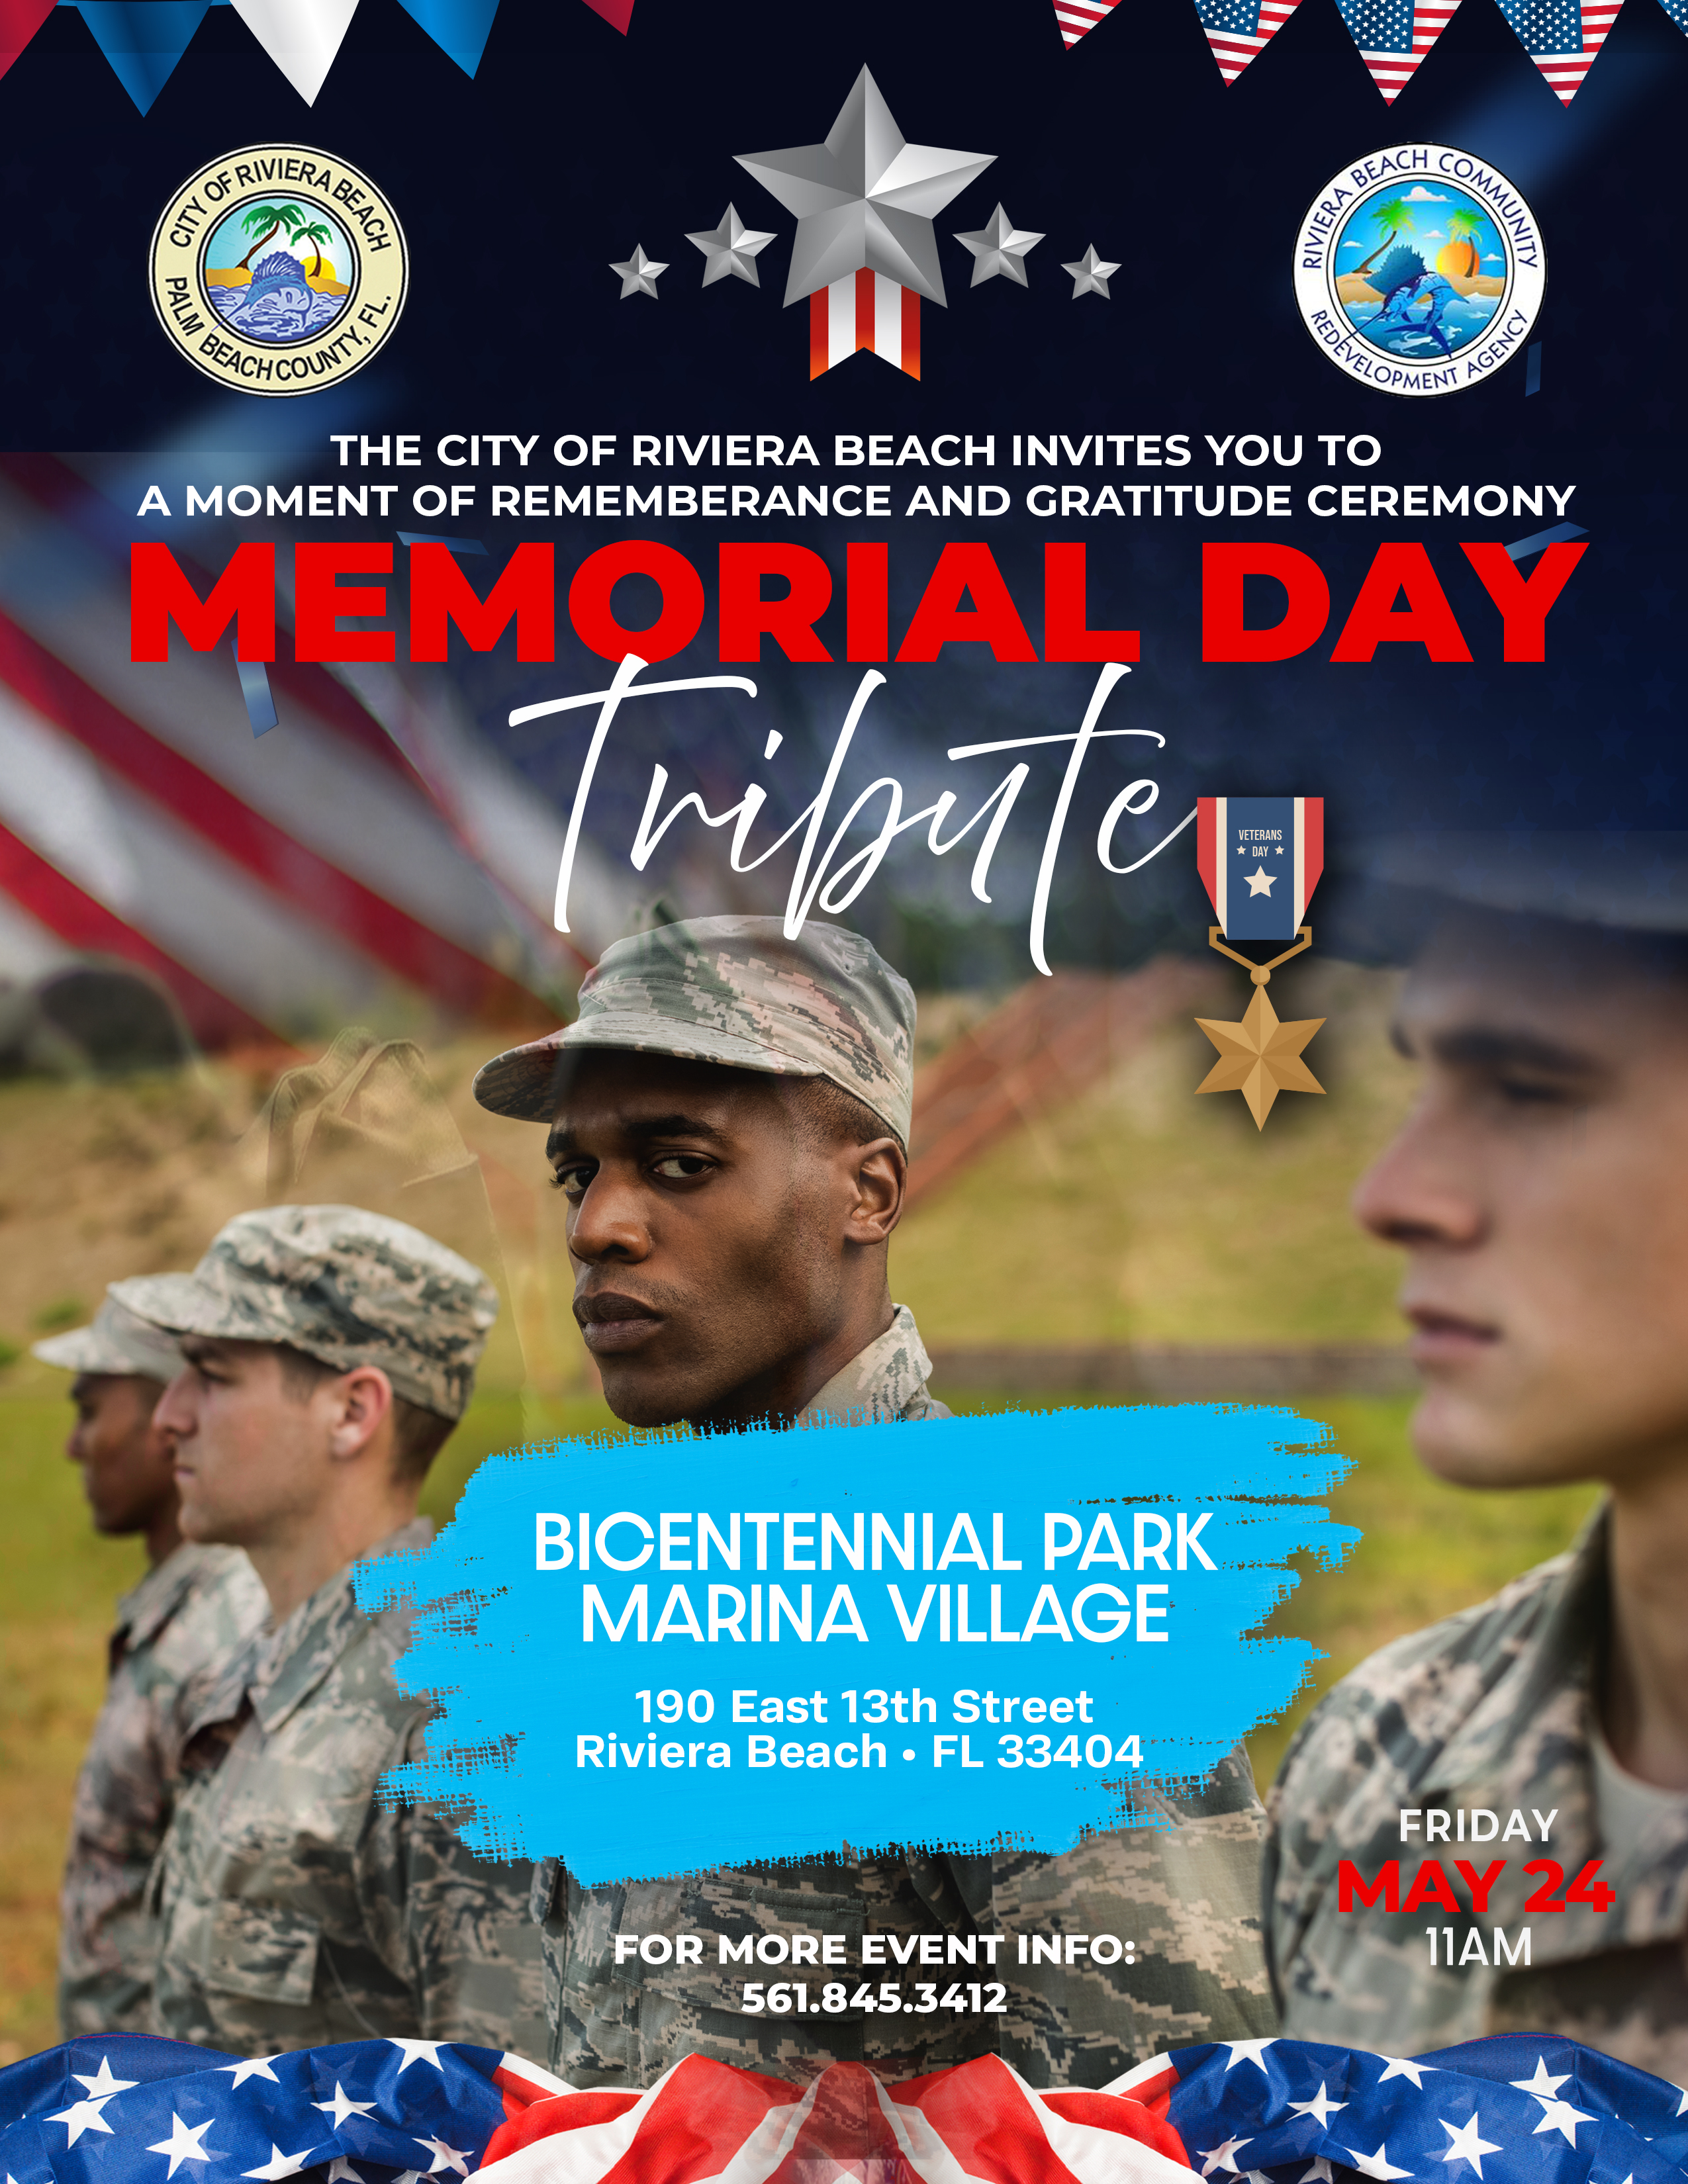 THE CITY OF RIVIERA BEACH INVITES YOU TO A MOMENT OF REMEMBERANCE AND GRATITUDE CEREMONY MEMORIAL DAY BICENTENNIAL PARK MARINA VILLAGE 190 East 13th Street Riviera Beach • FL 33404 FRIDAY MAY 24 11AM FOR MORE EVENT INFO: 561.845.3412